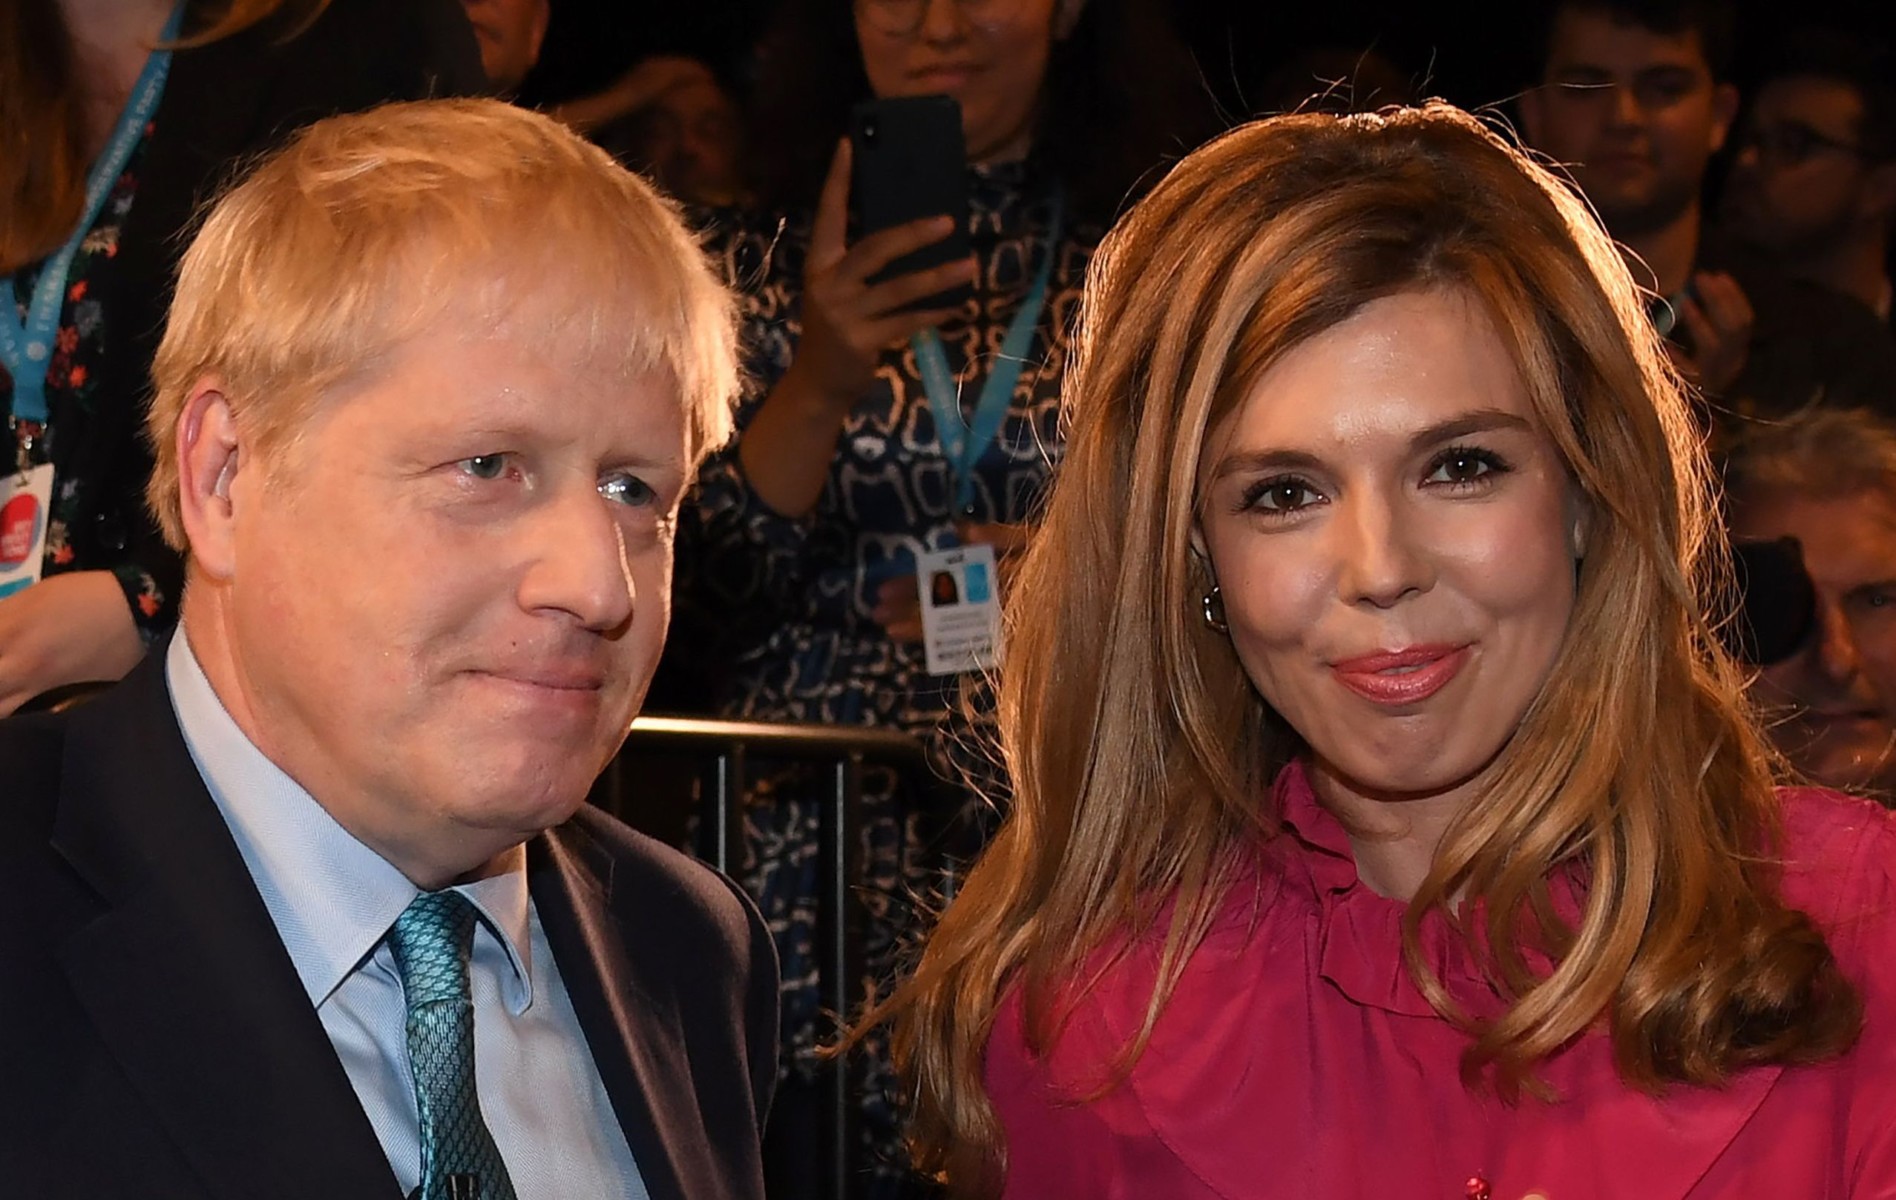 The PM announced his engagement to girlfriend Carrie Symonds on Saturday with the couple also expecting a baby